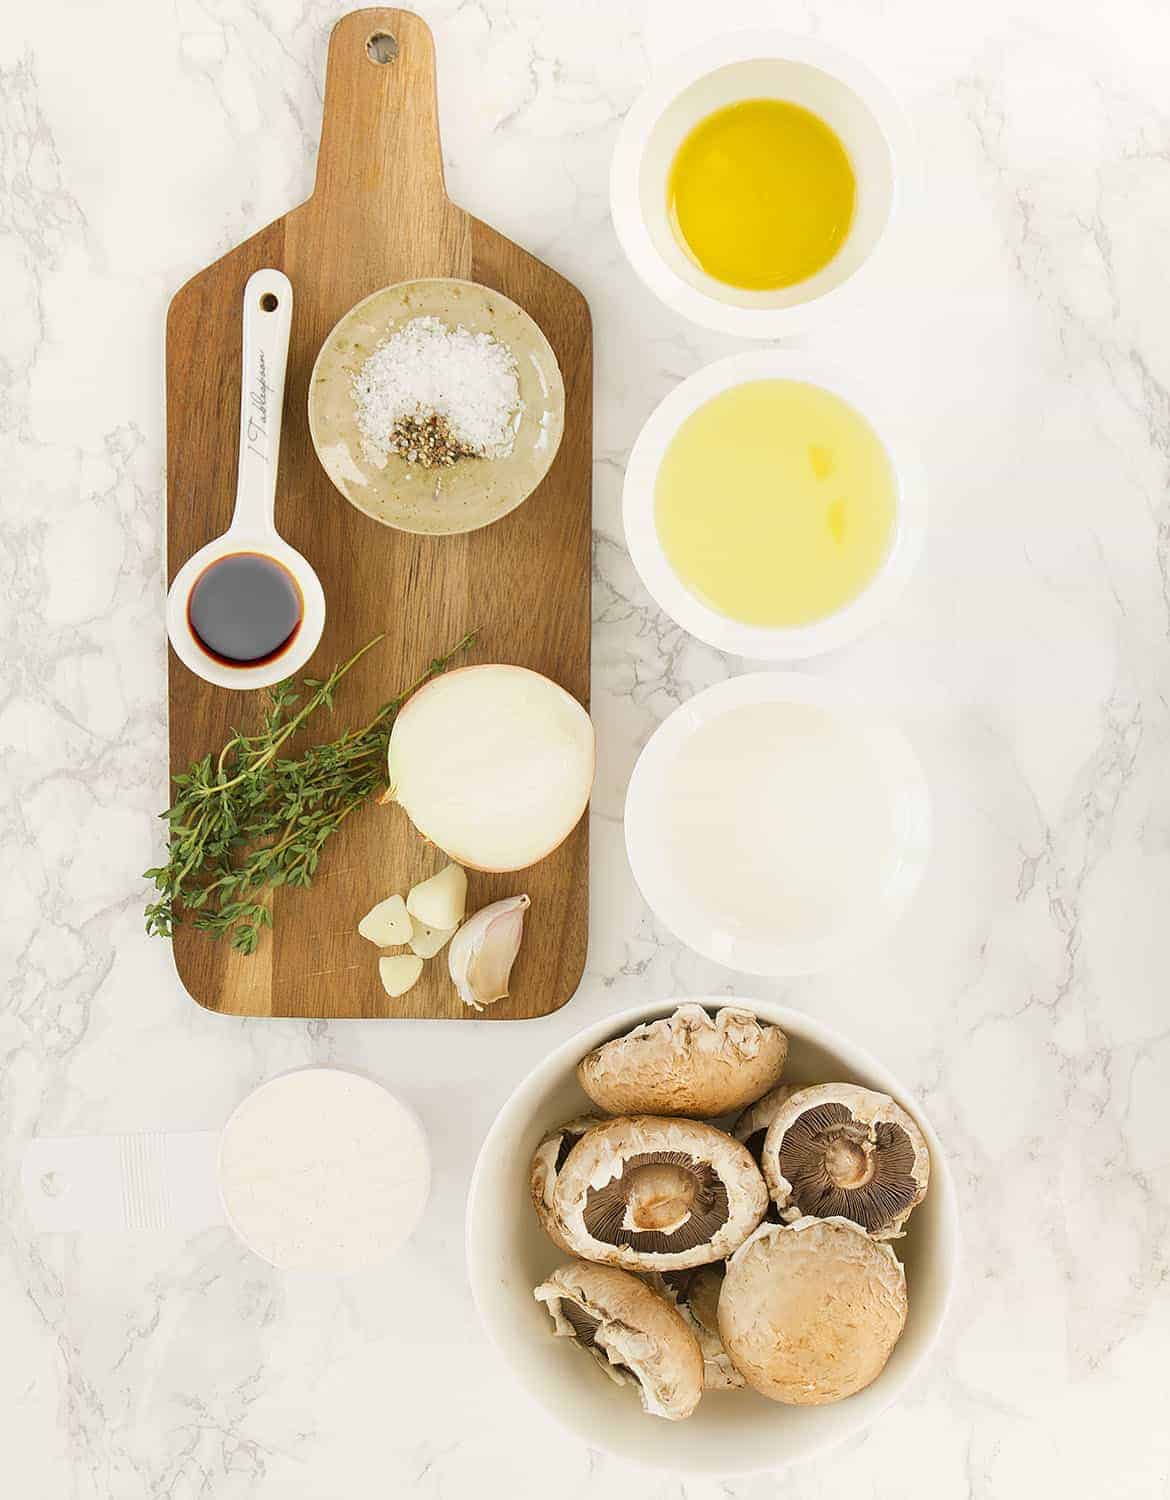 The ingredients for this healthy mushroom soup are arranged over a white background.